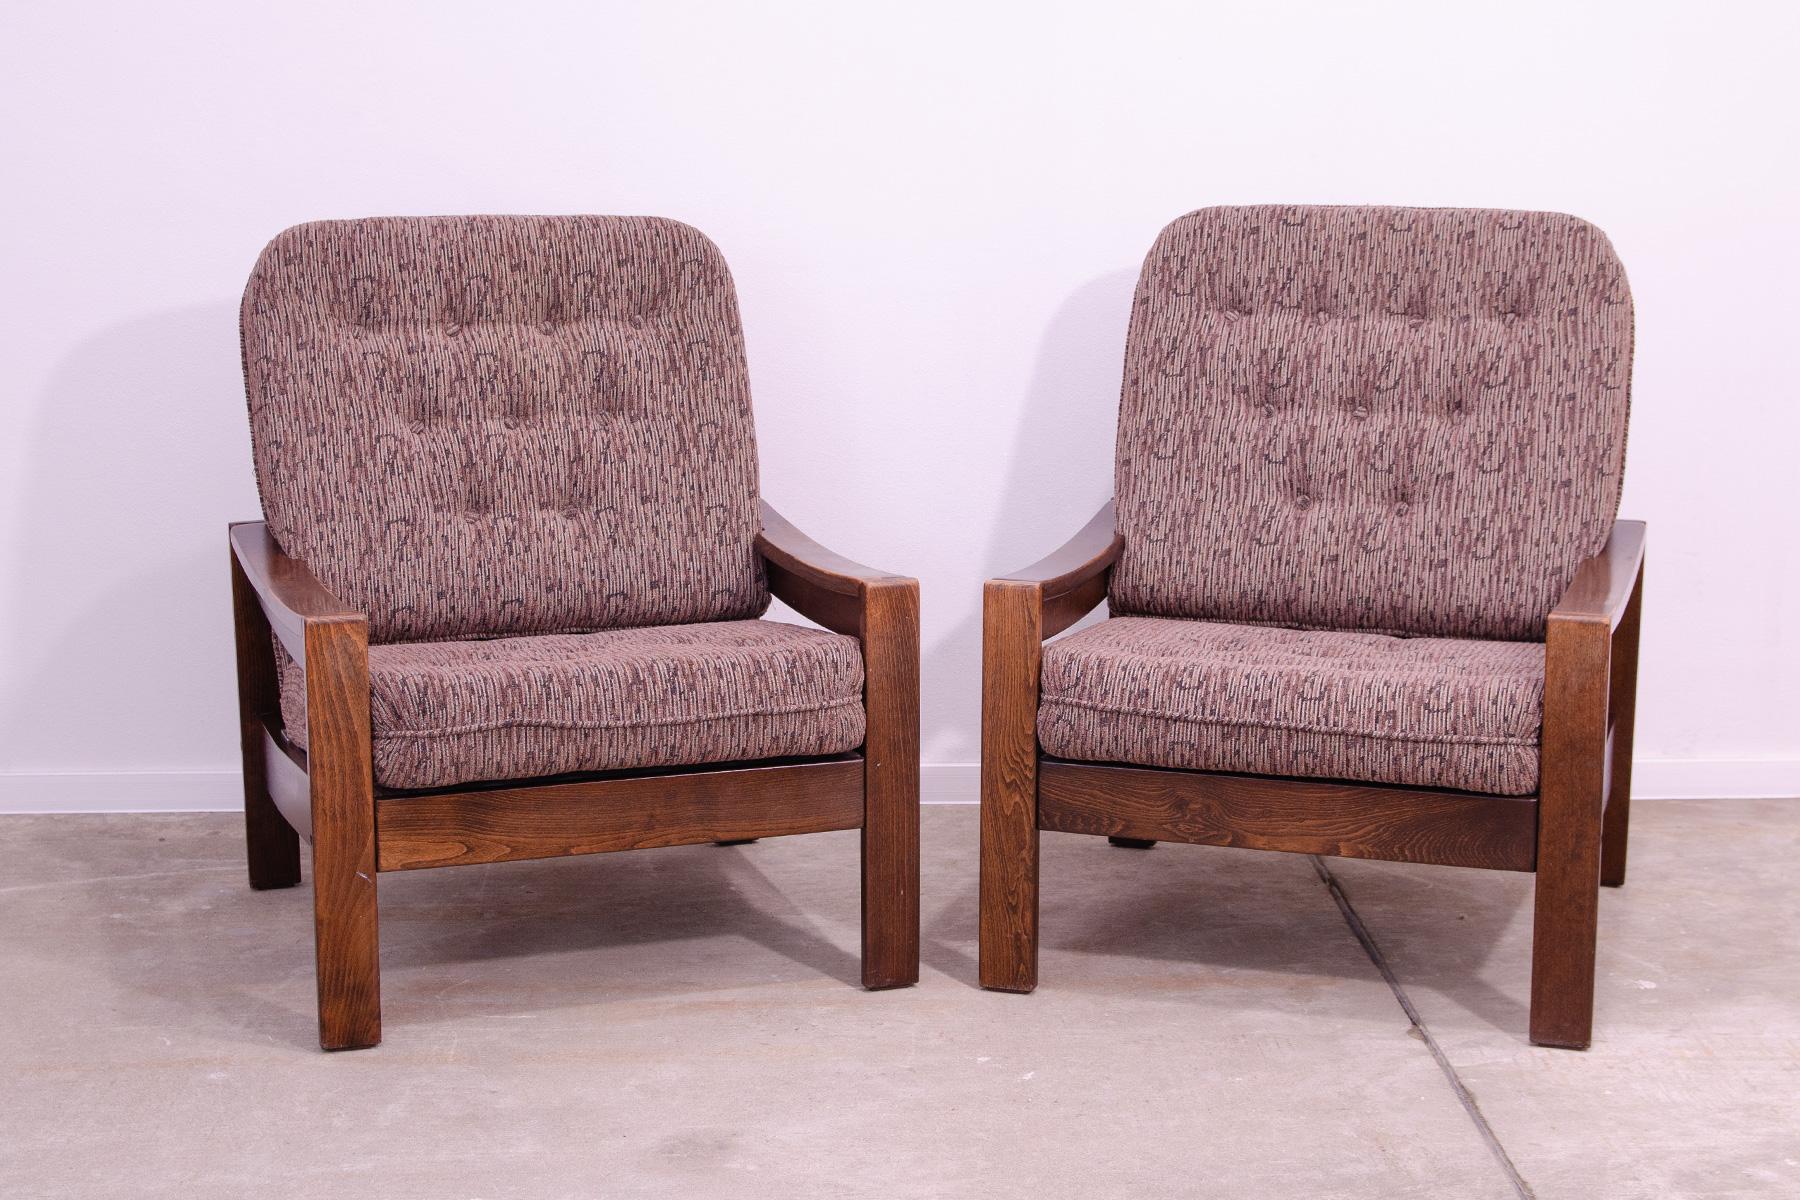 These armchairs were made in the former Czechoslovakia in the 1980s.
The chairs are made of beechwood and the cushions are upholstered in fabric.
They are in very good vintage condition with no damage, showing slight signs of age and use.
Price is